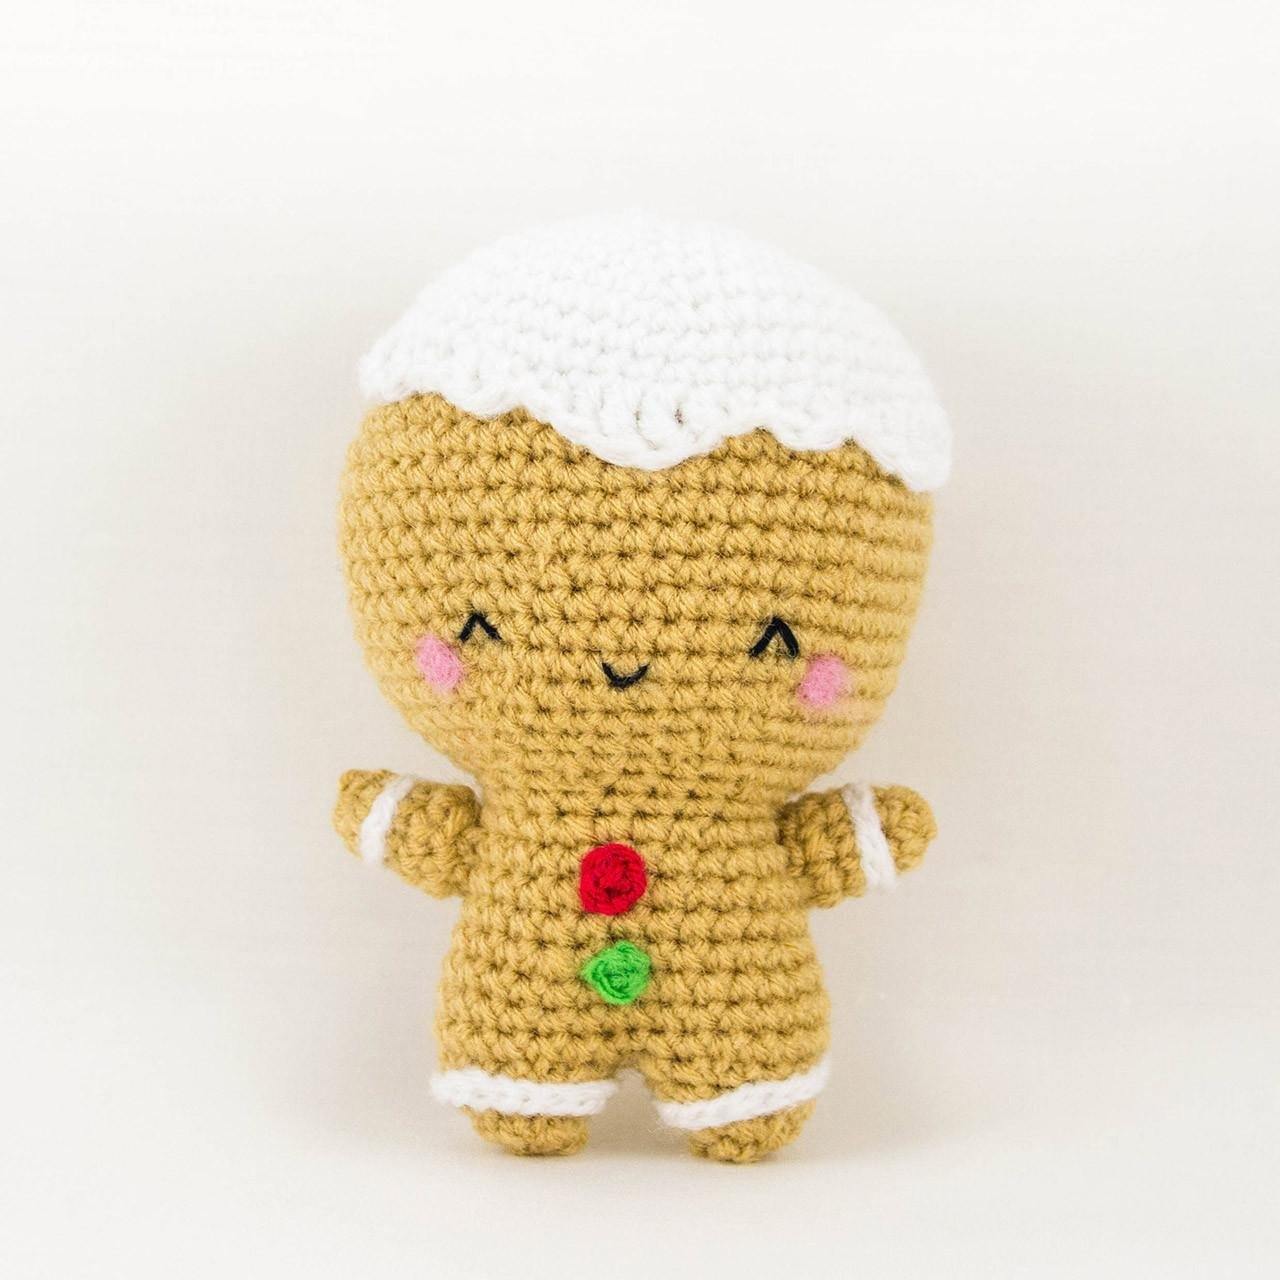 Ginger the Gingerbread Man Amigurumi For Christmas